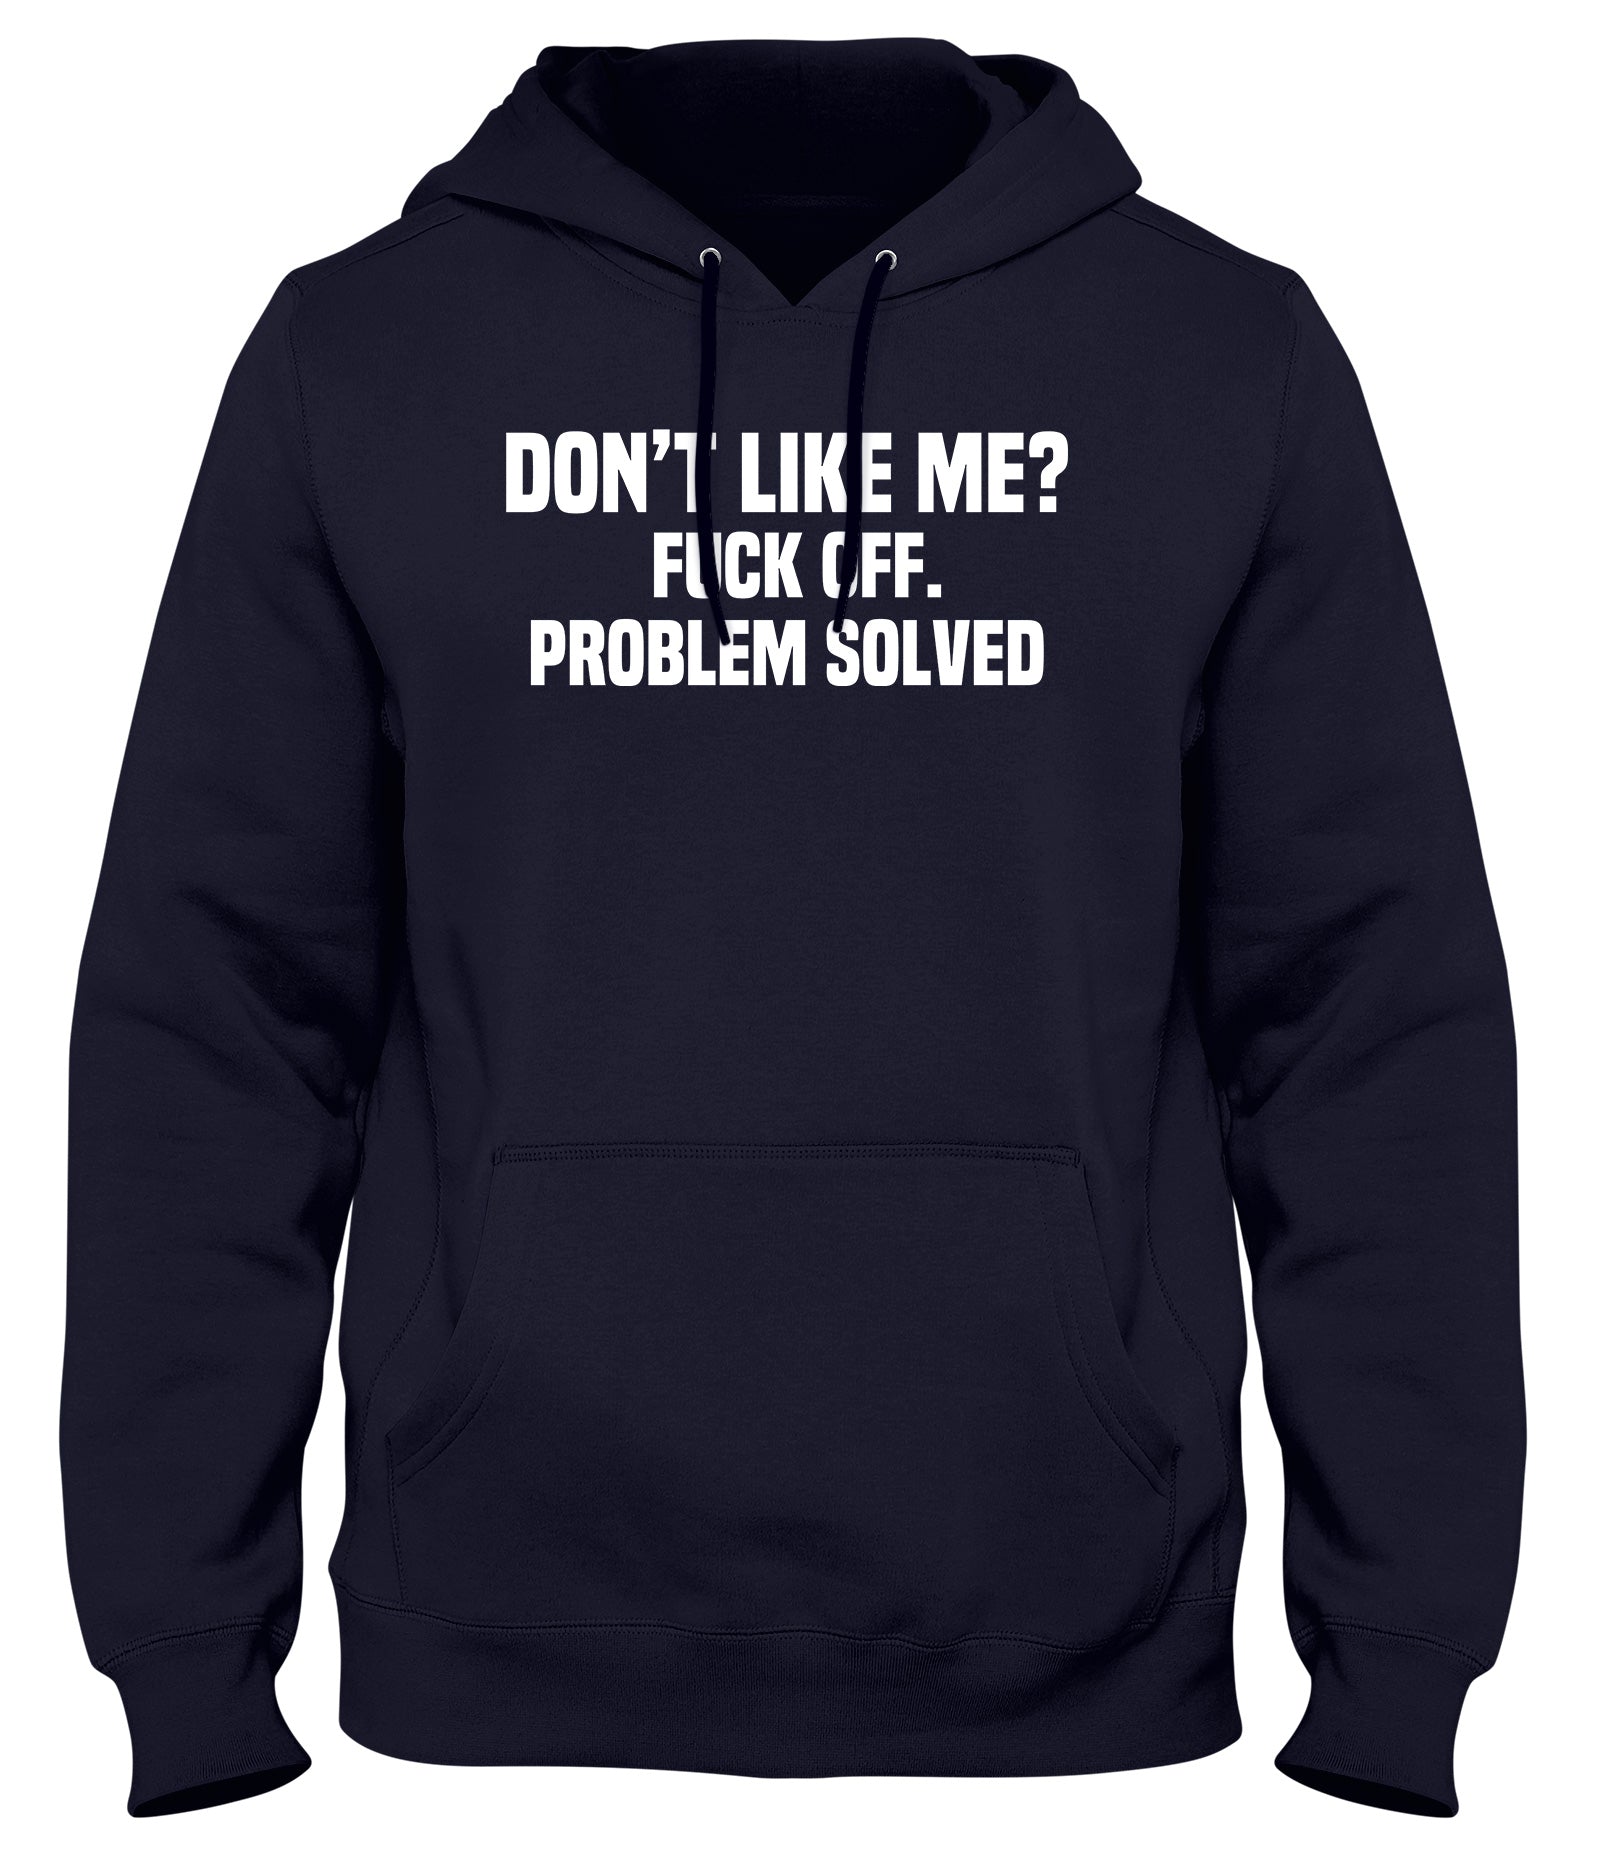 DON'T LIKE ME? F*CK OFF. PROBLEM SOLVED MENS WOMENS LADIES UNISEX FUNNY SLOGAN HOODIE